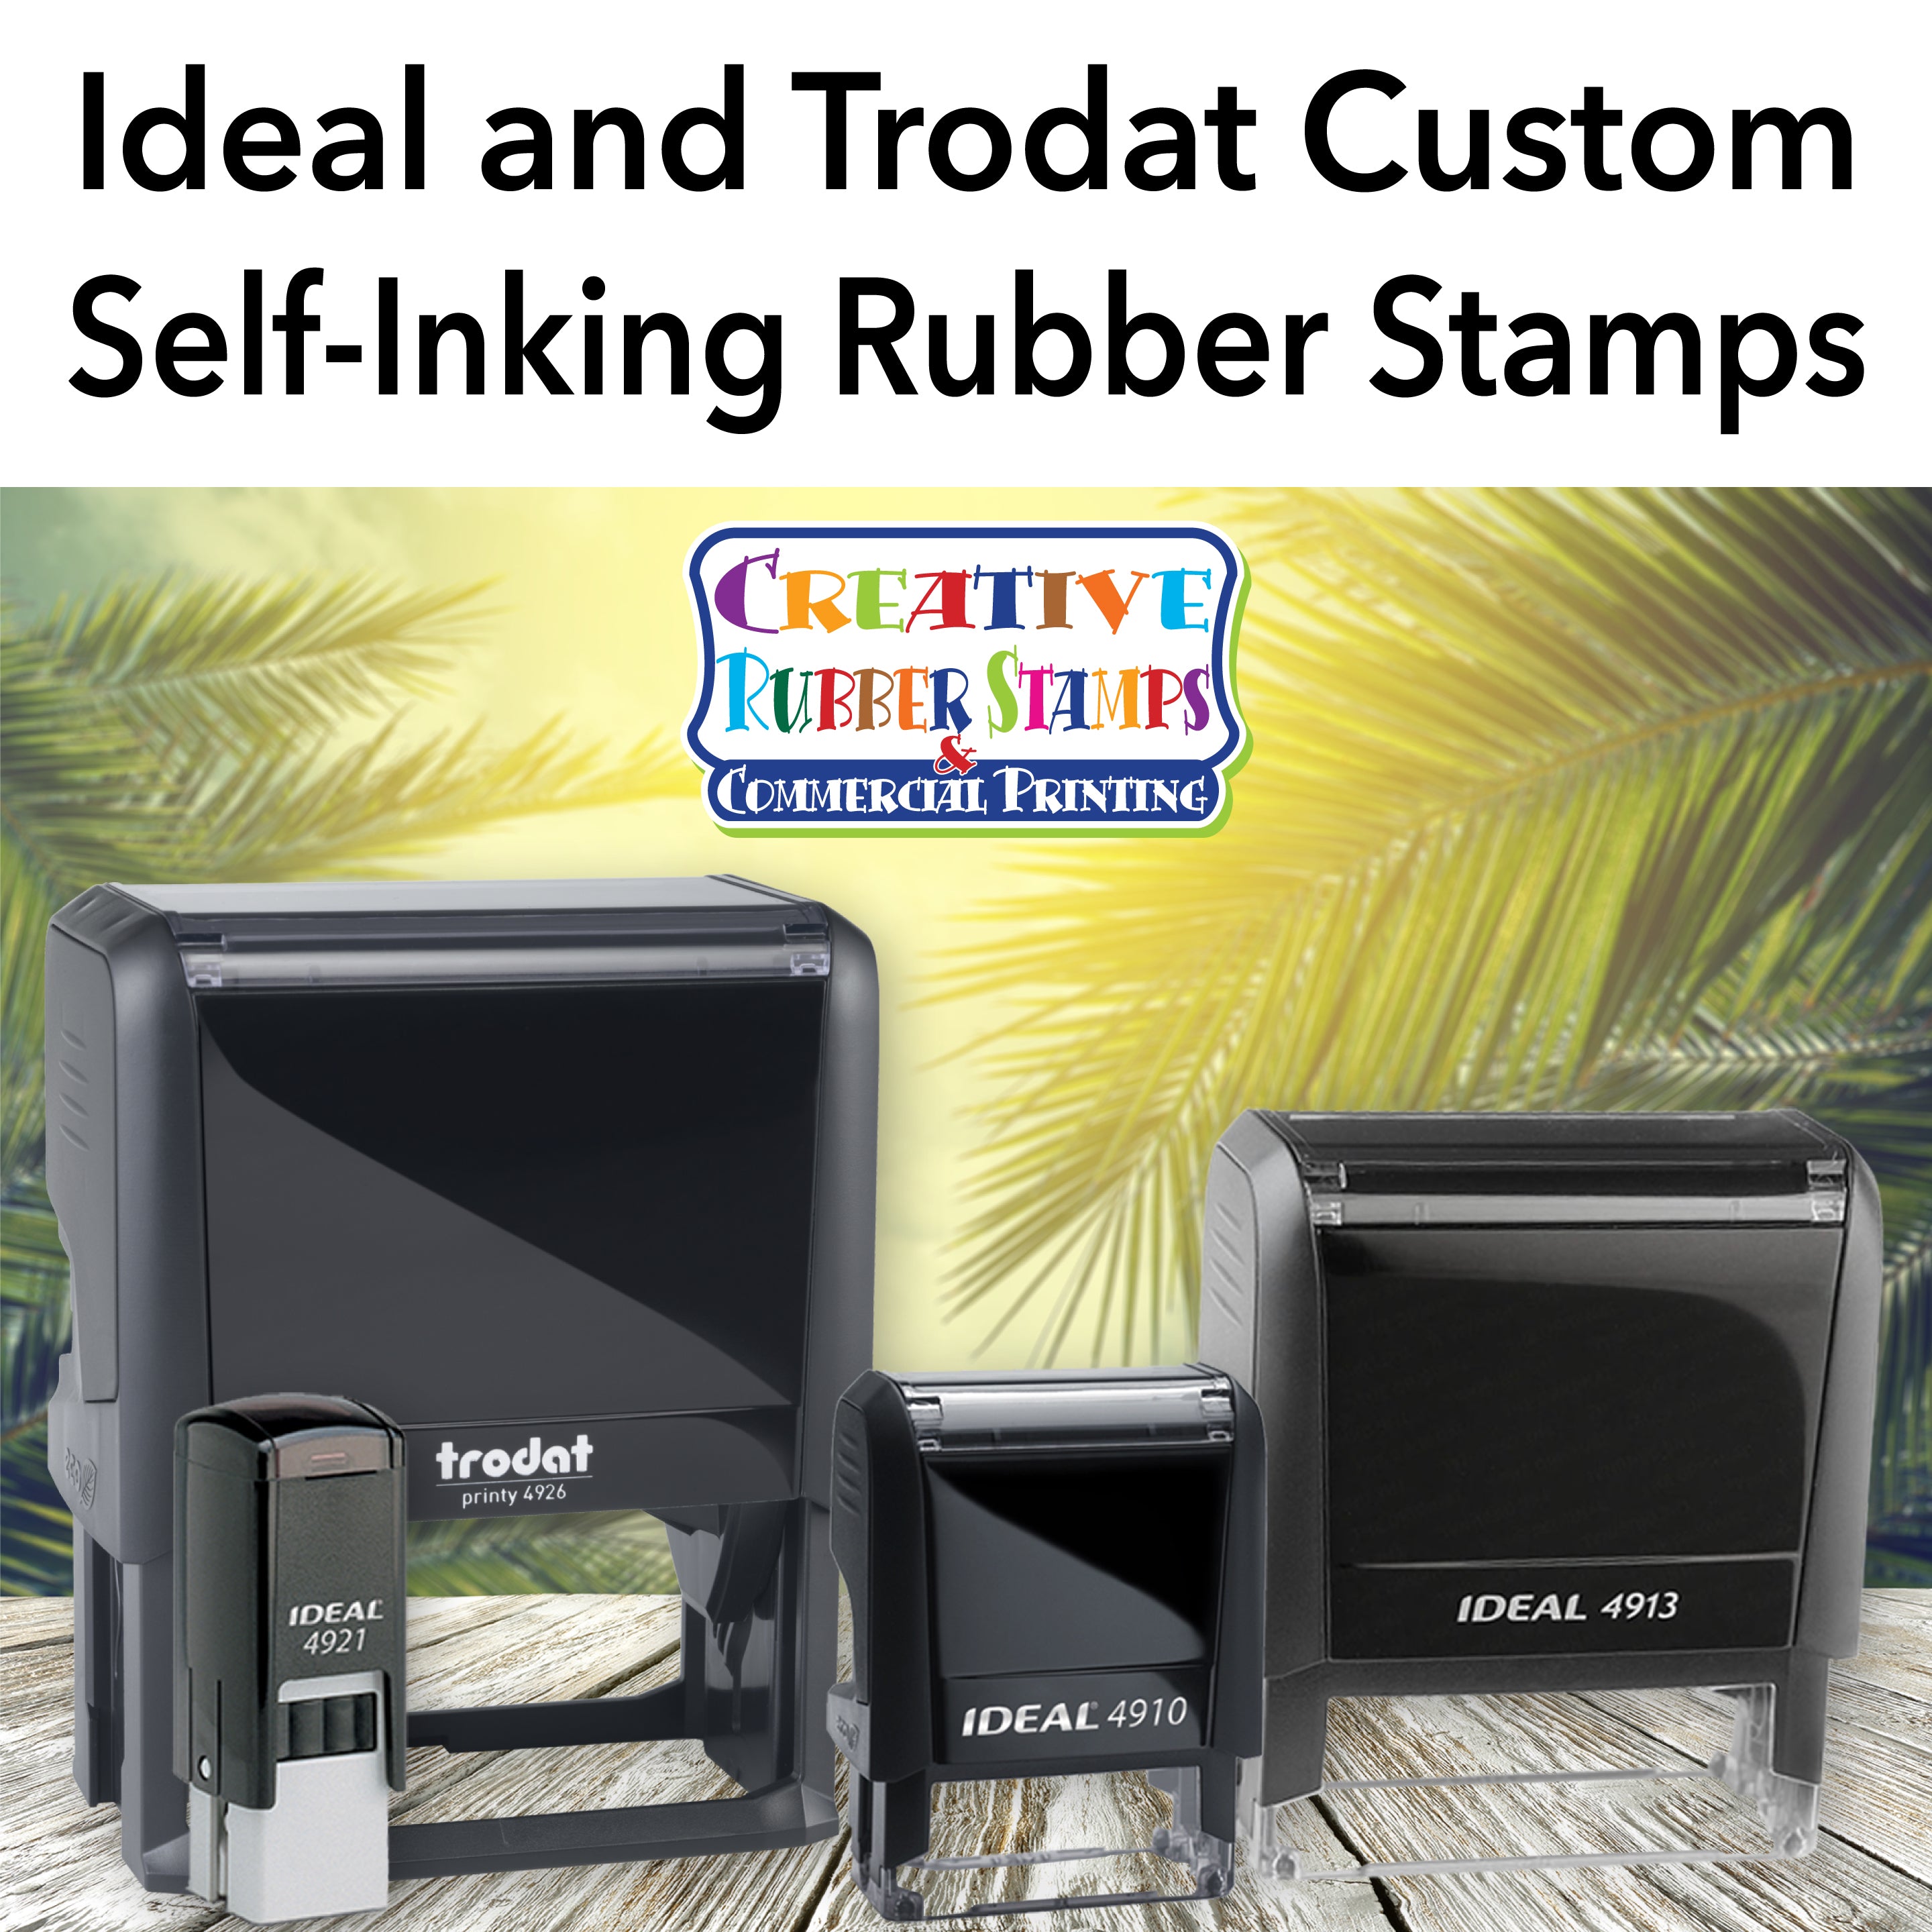 Custom, Self-Inking Rubber Stamps